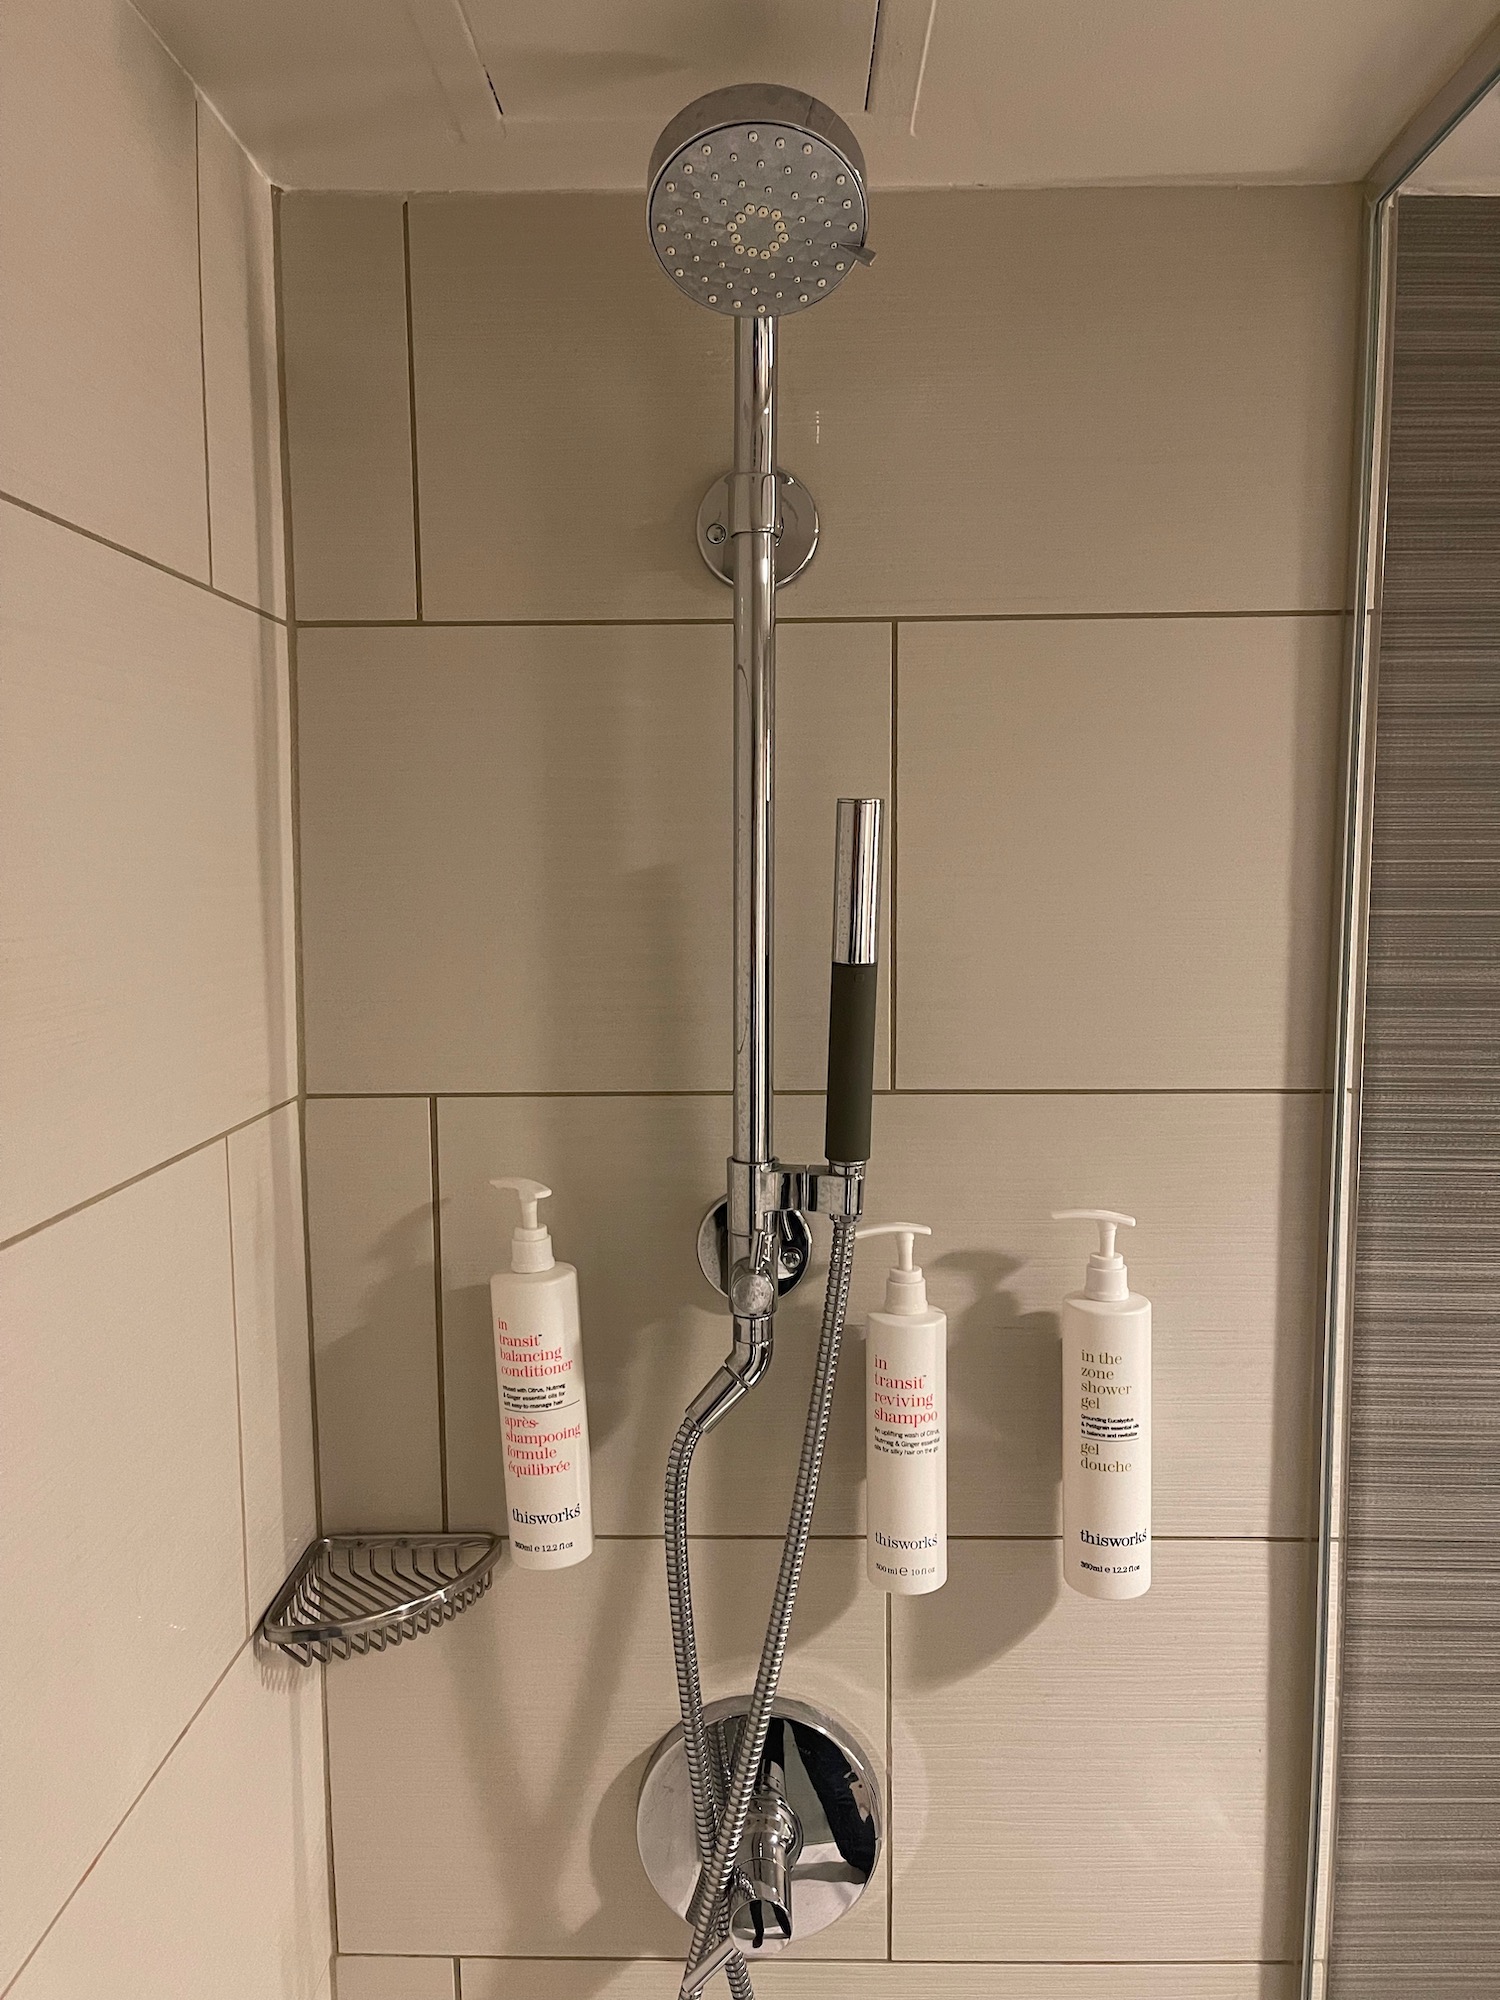 a shower head with a shower head and soaps